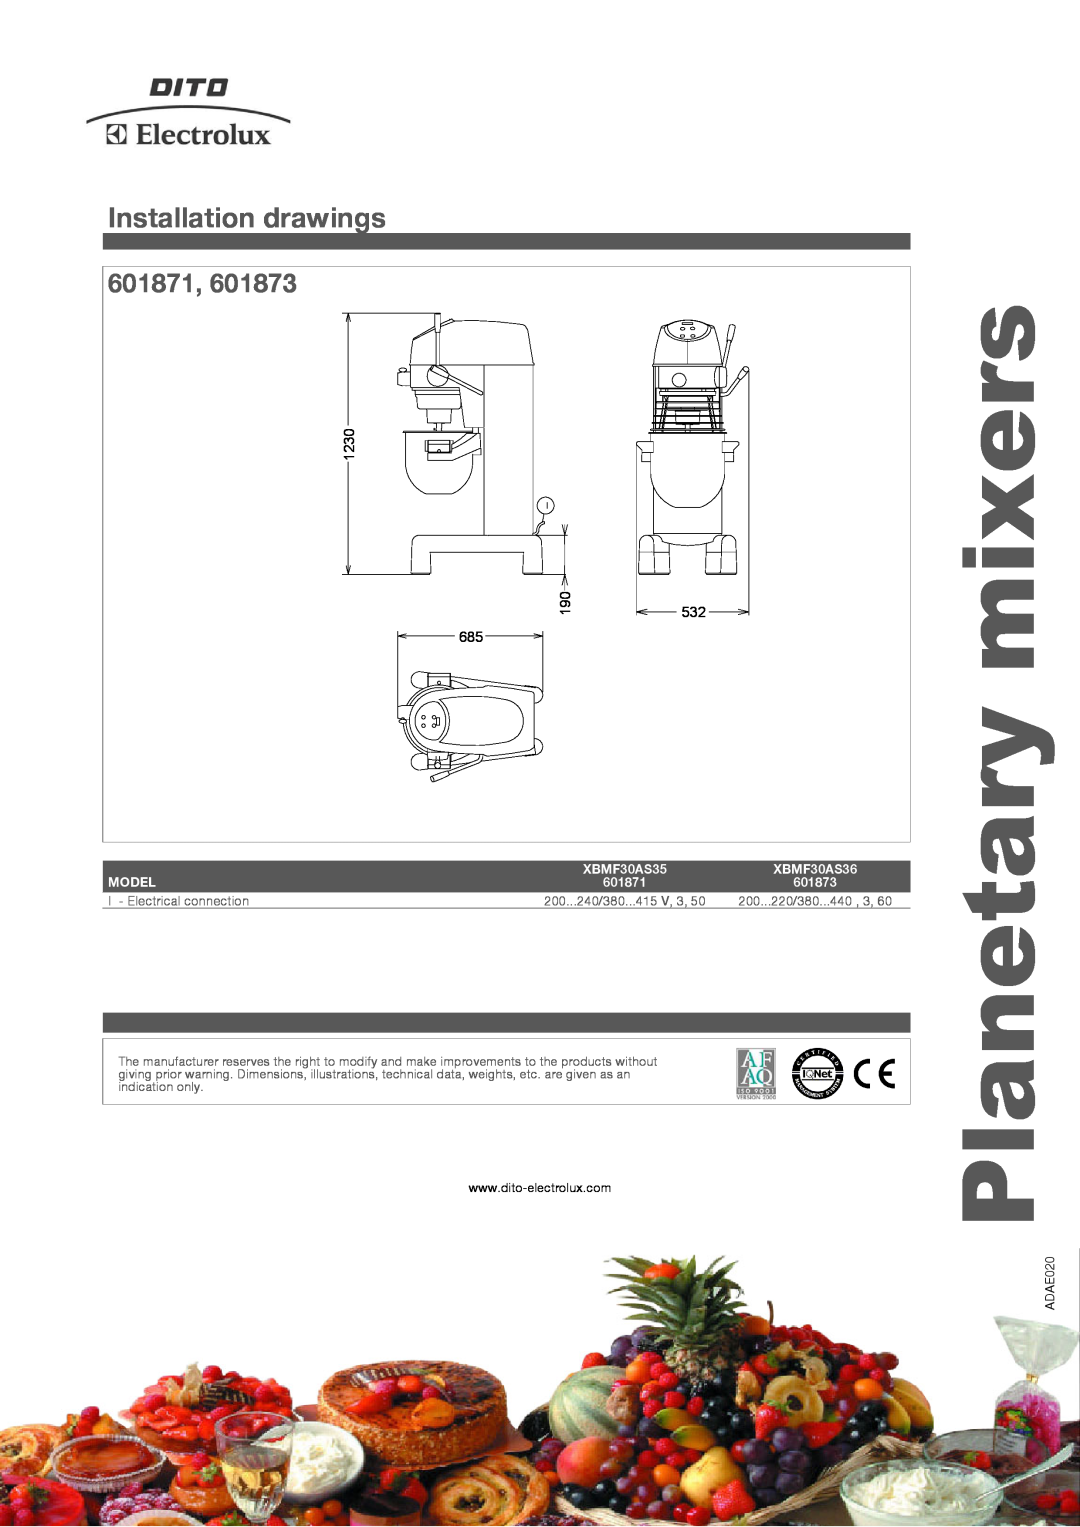 Electrolux XBMF30AS36 Installation drawings, mixers, Planetary, 601871, 1230, Model, XBMF30AS35, 601873, indication only 